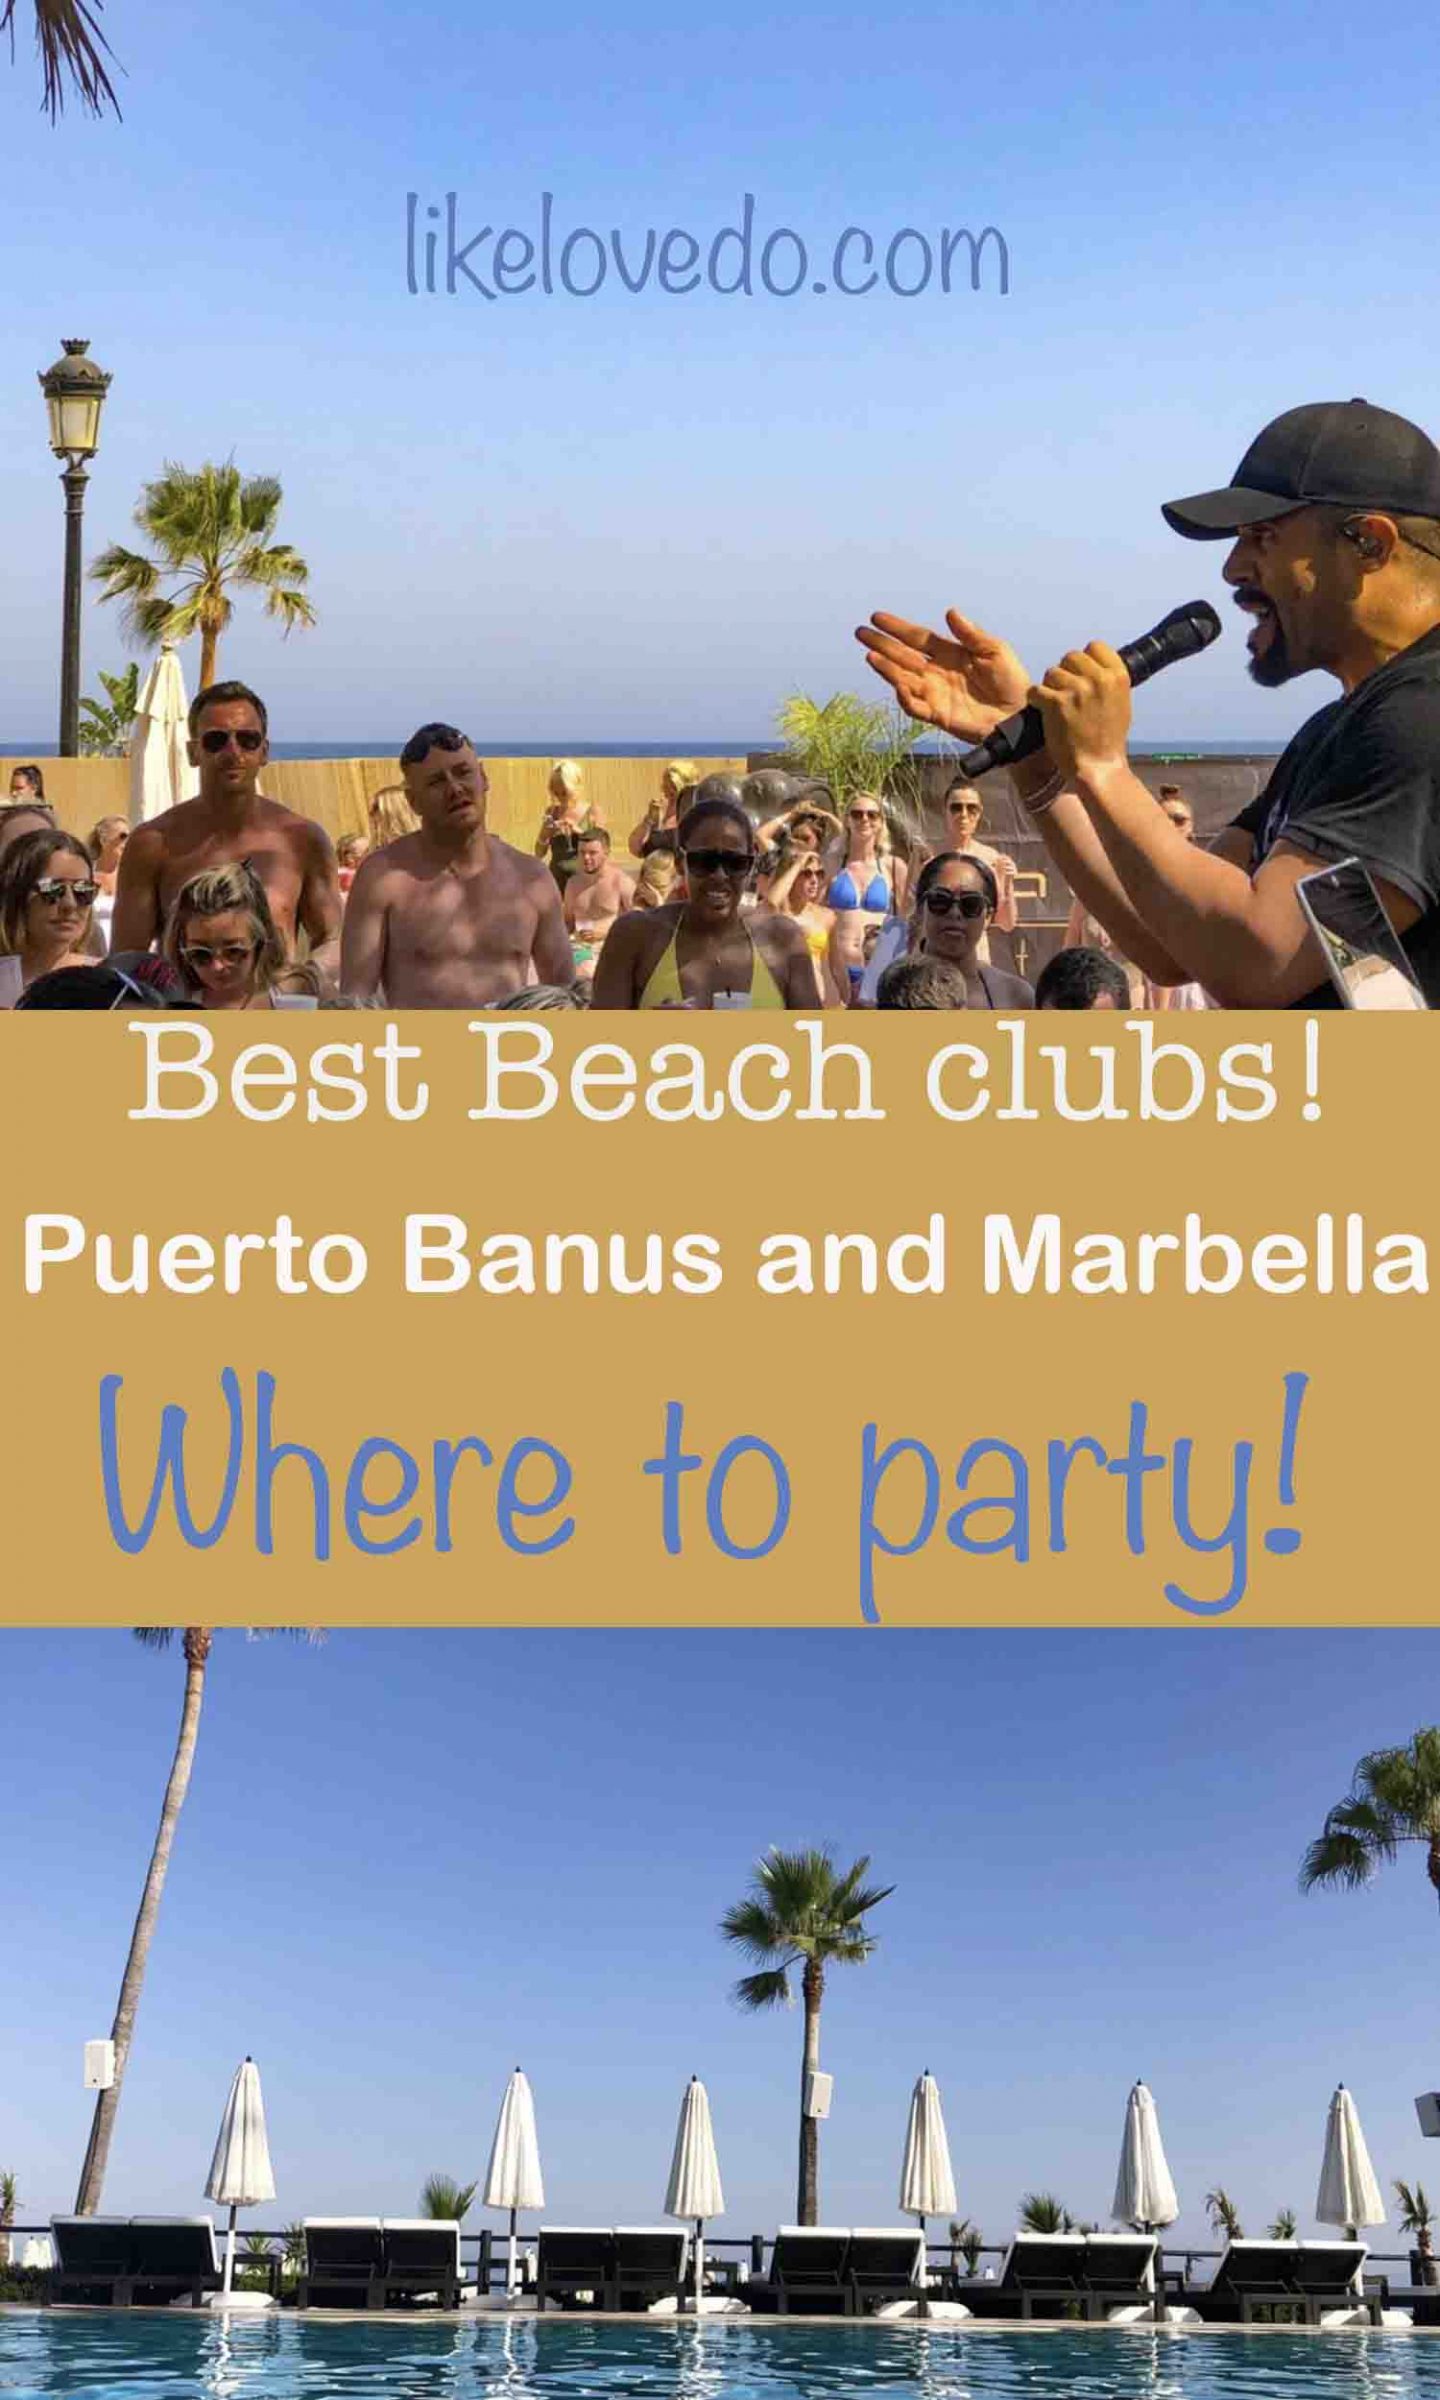 Best beach clubs in Puerto banus and Marbella where to party 